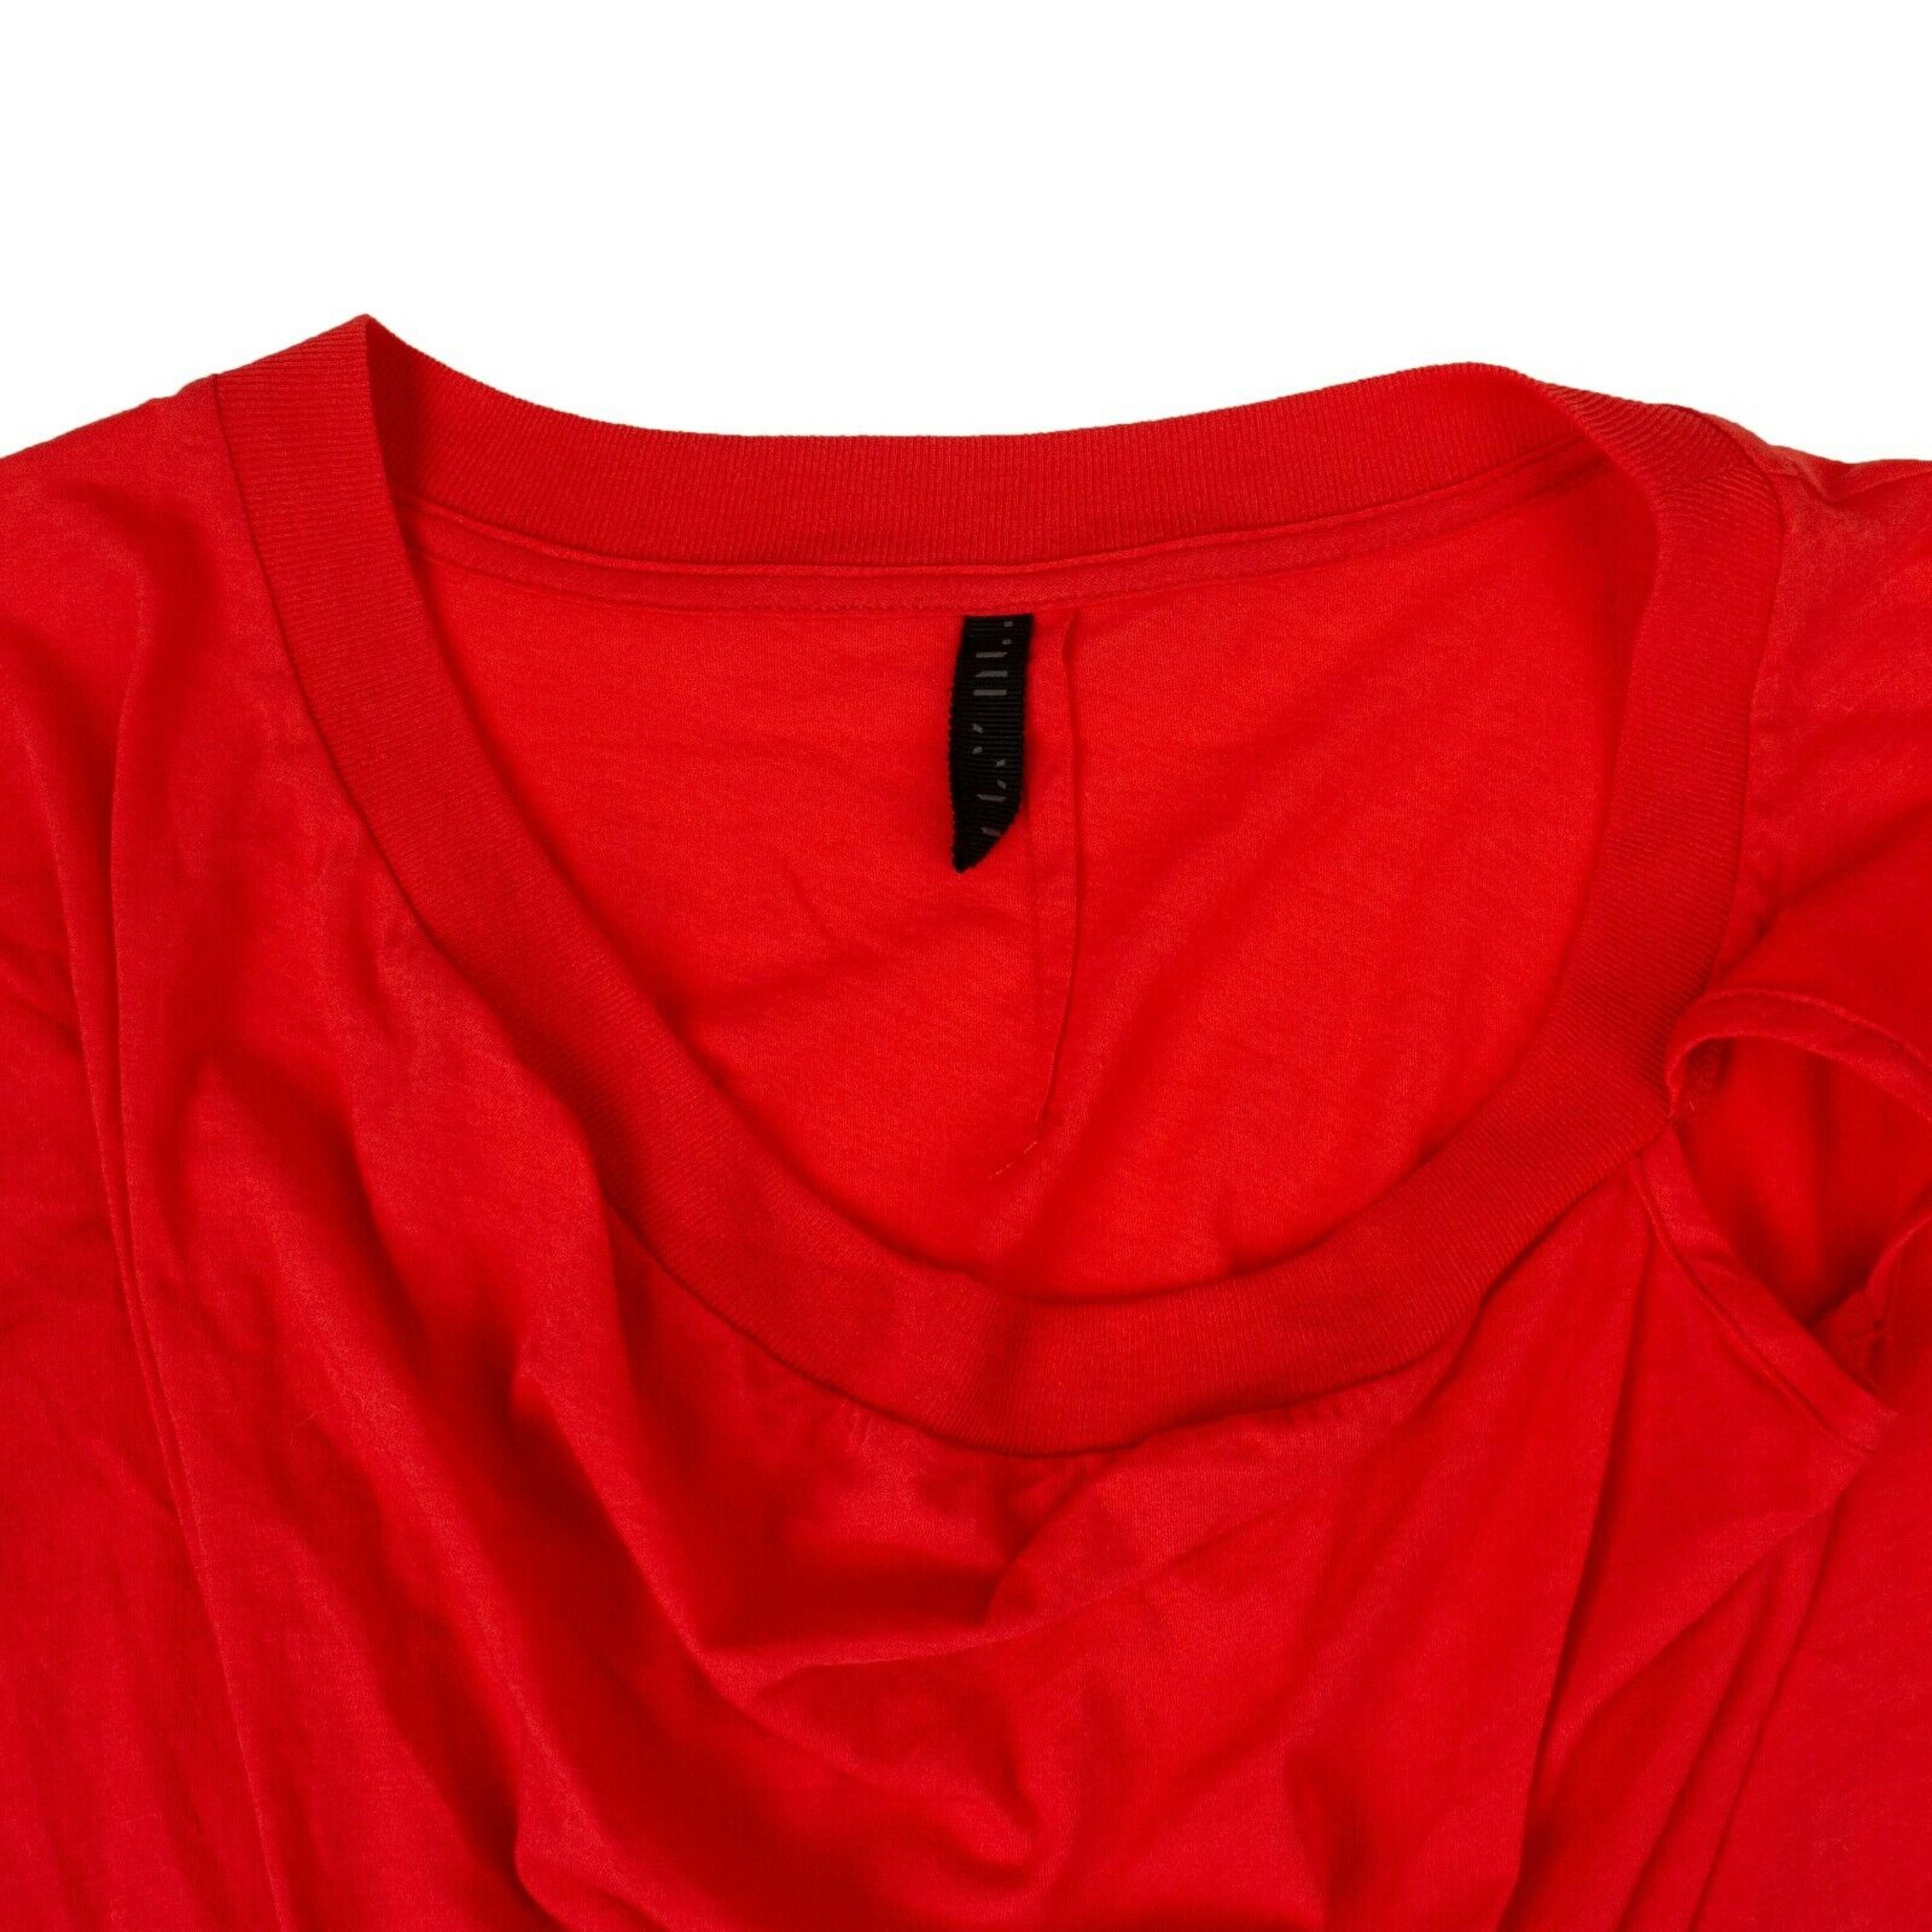 Alternate View 2 of Unravel Project Knot Detailed T-Shirt - Red